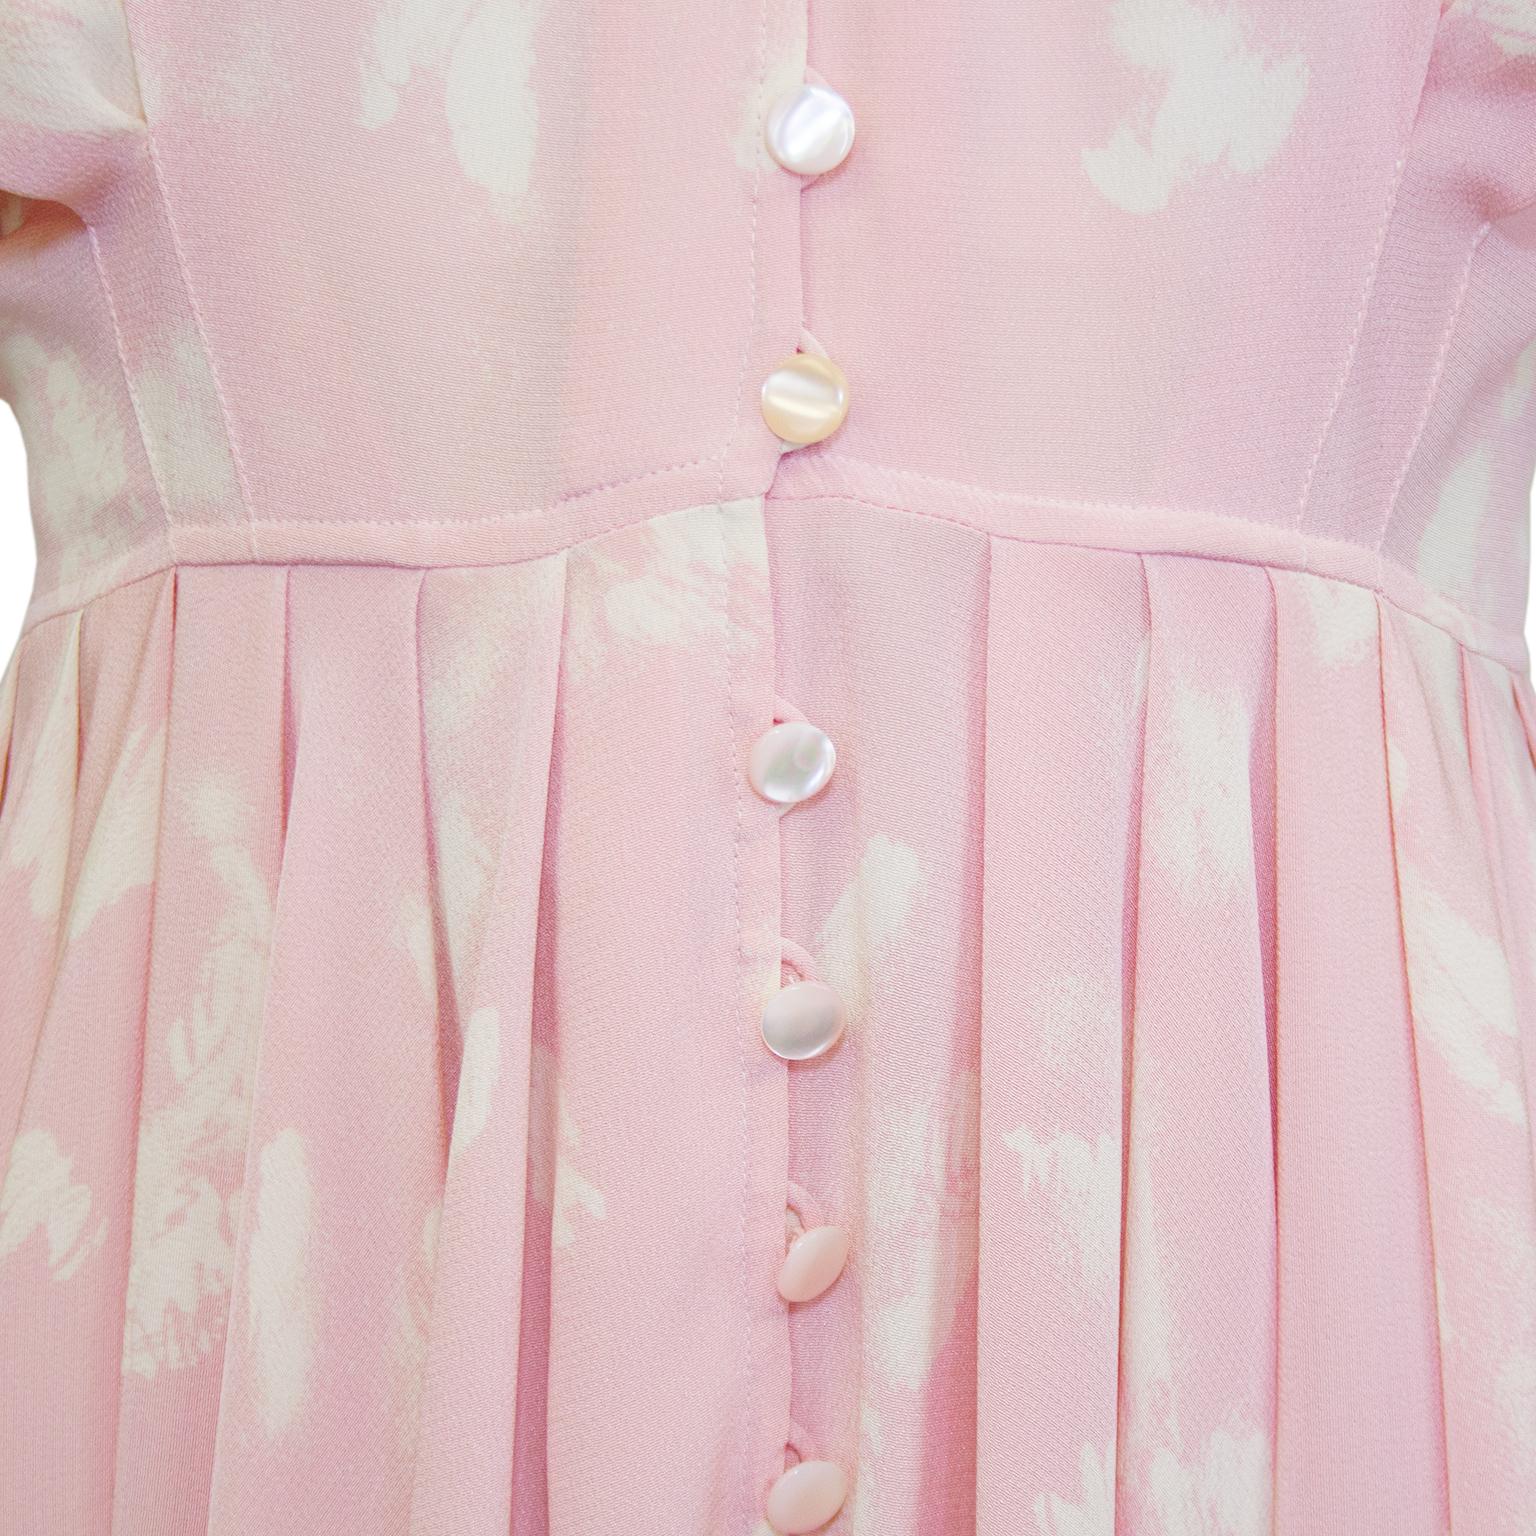 1980s Emmanuel Ungaro Pink and Cream Crepe Dress  In Good Condition For Sale In Toronto, Ontario